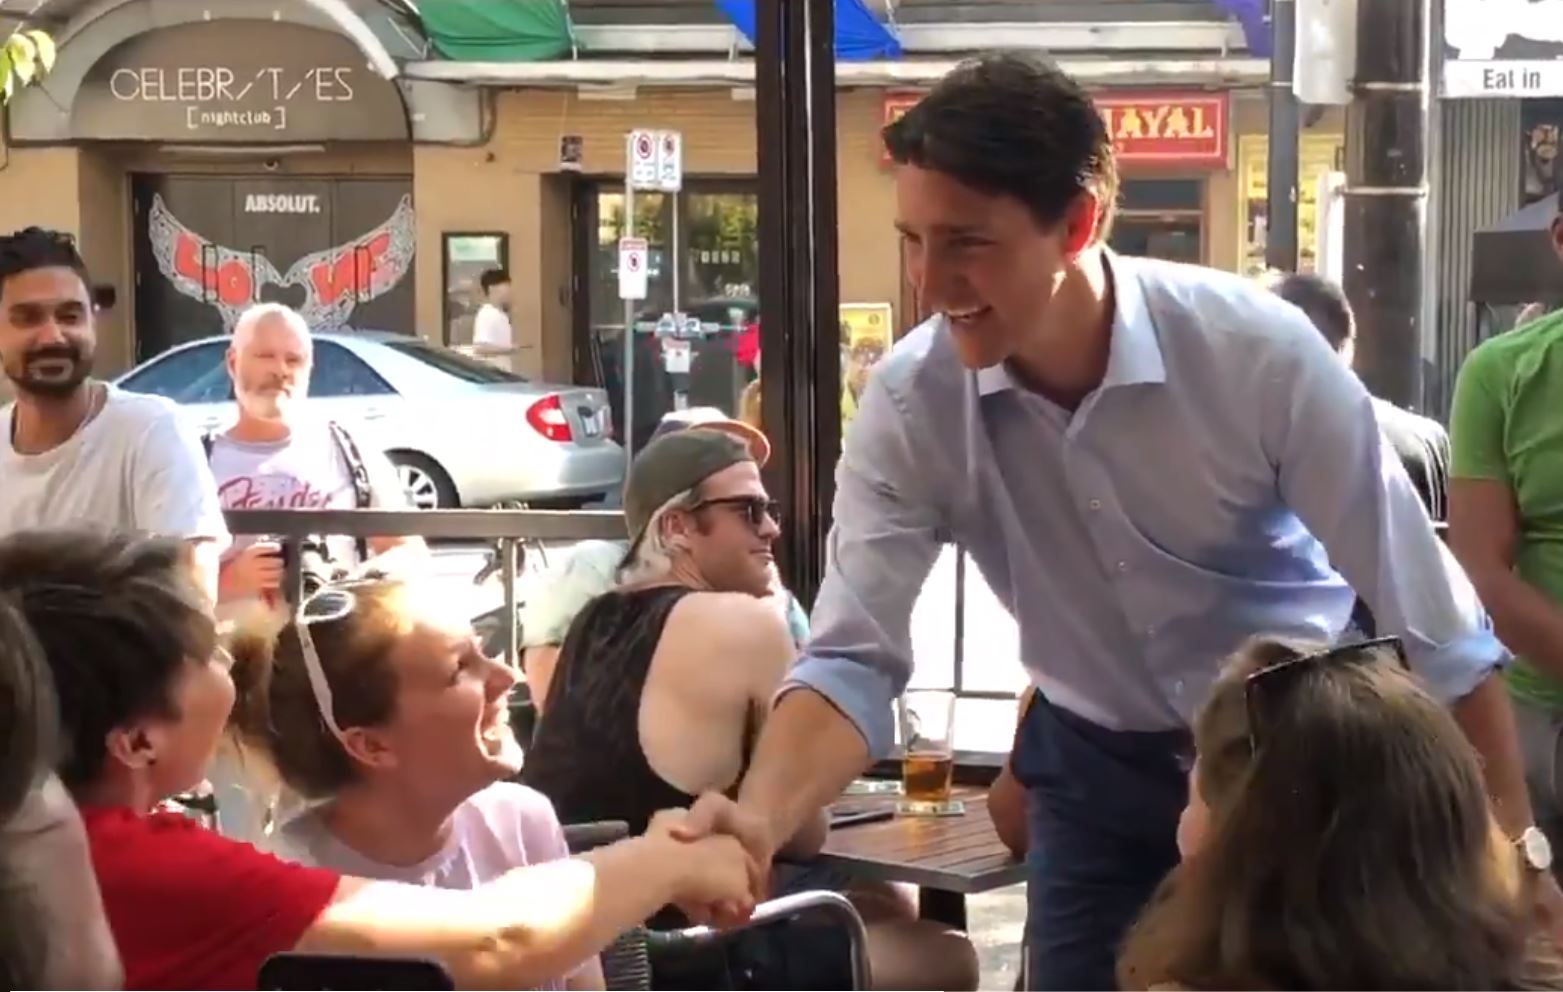 Watch Canadian PM Justin Trudeau surprise gay bar patrons for Vancouver Pride